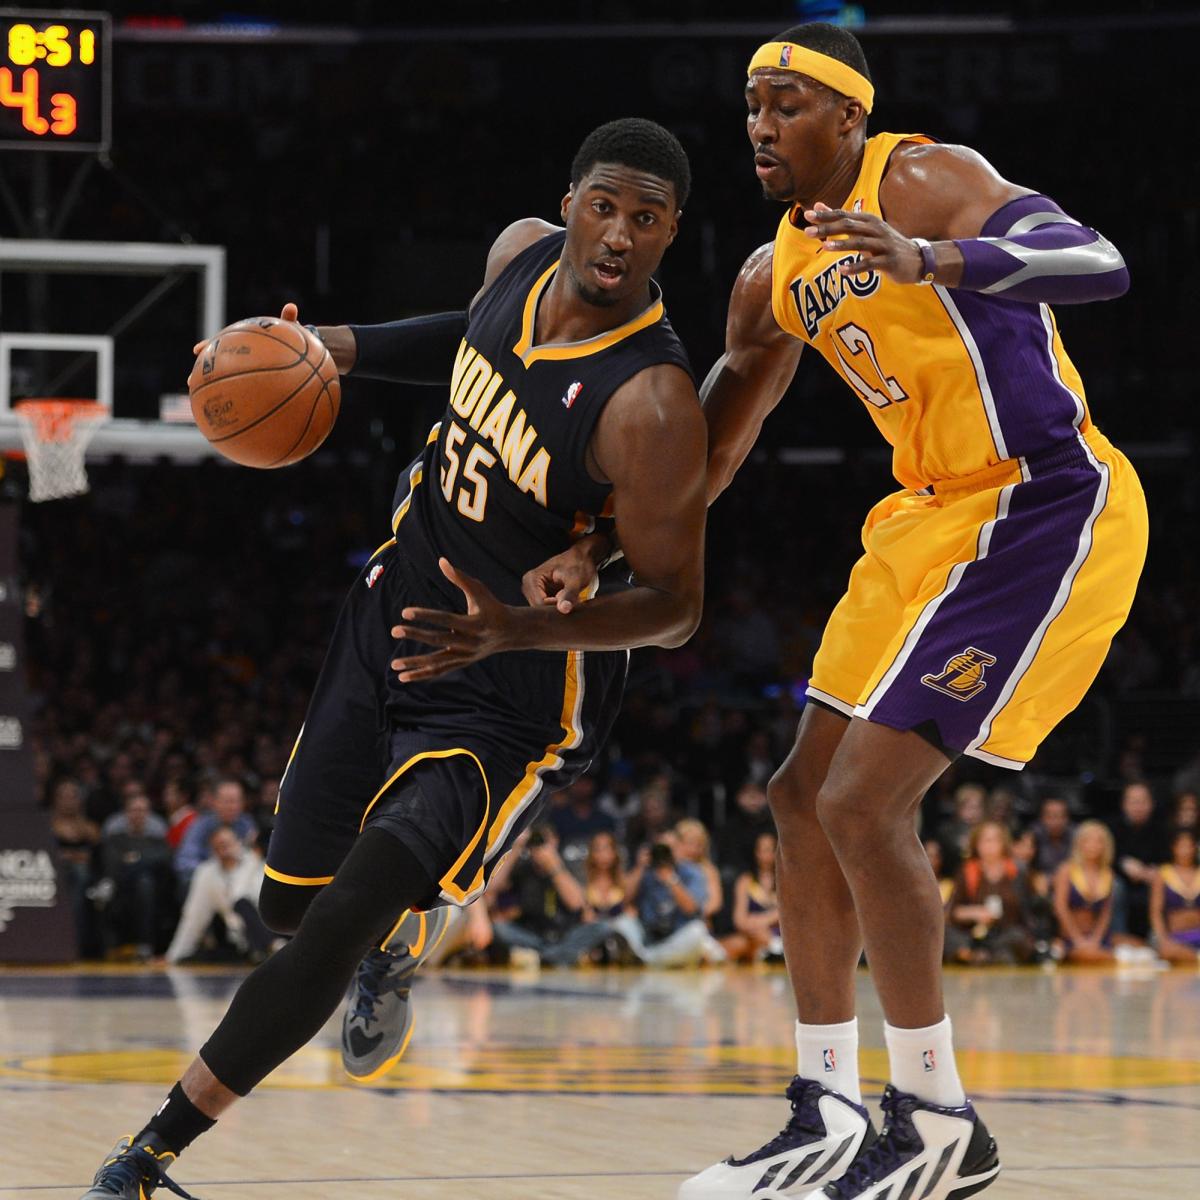 Los Angeles Lakers vs. Indiana Pacers: Preview, Analysis and Predictions